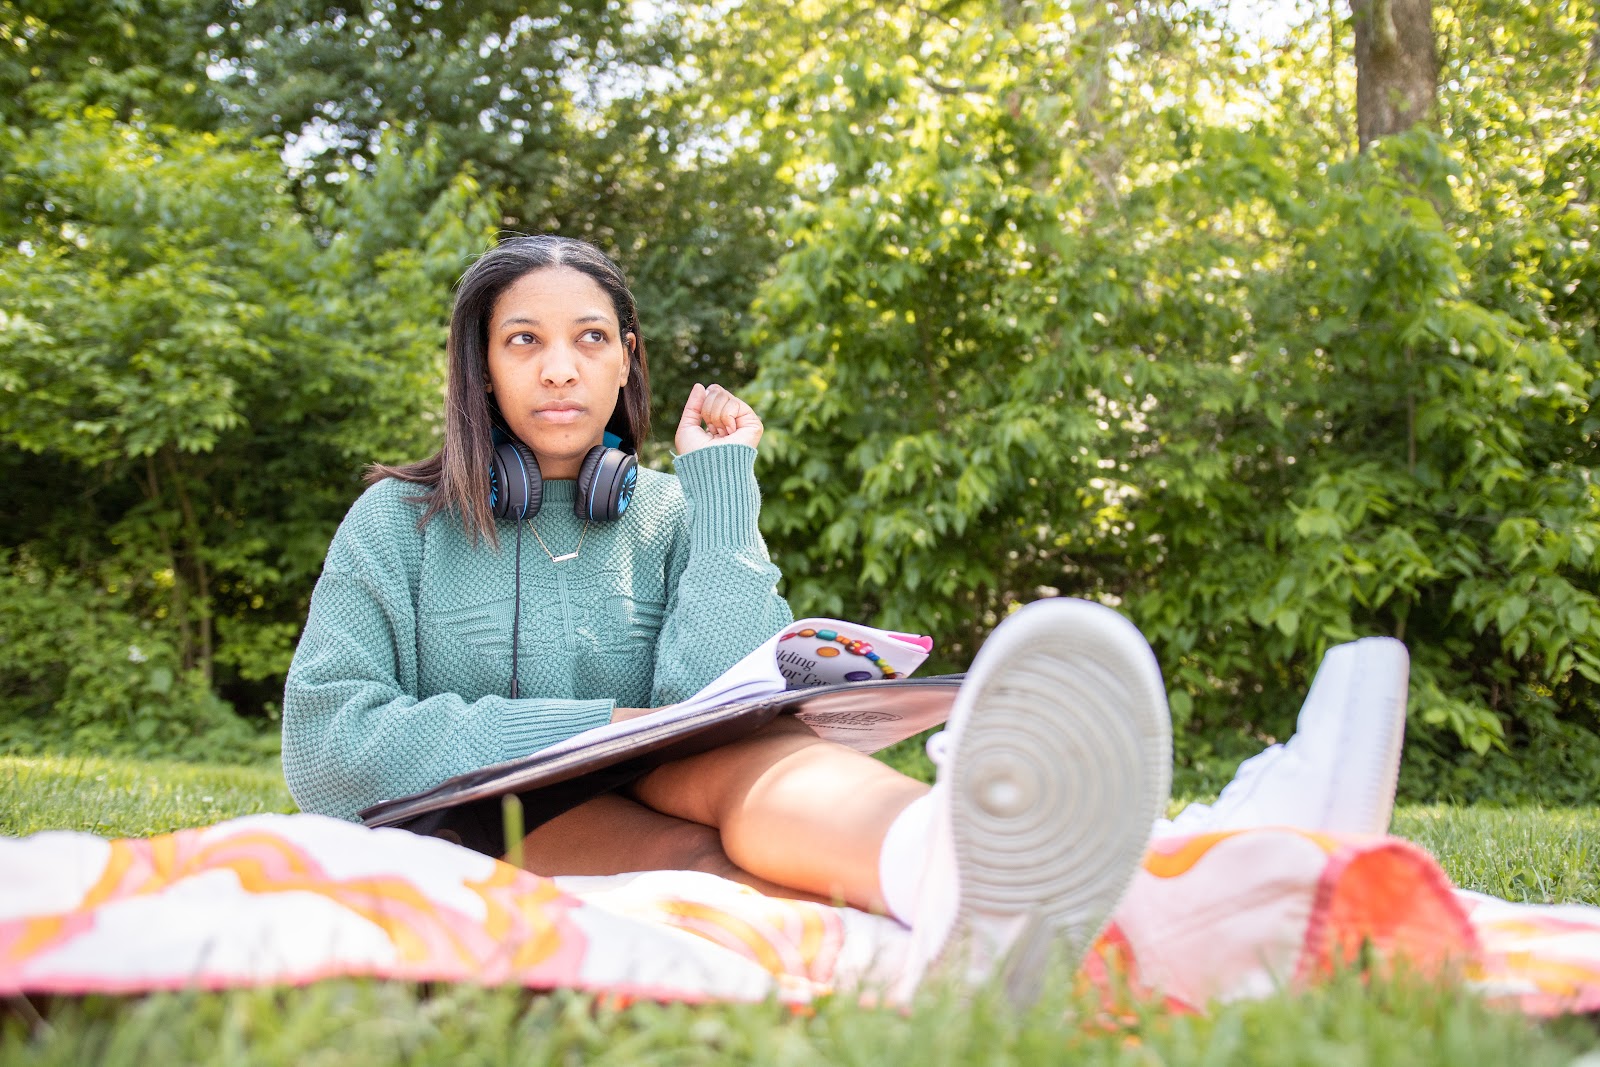 A young woman with headphones lowered to her neck sits on a blanket in a grassy outdoor space. She turns the page of a book and looks upward while contemplating. 